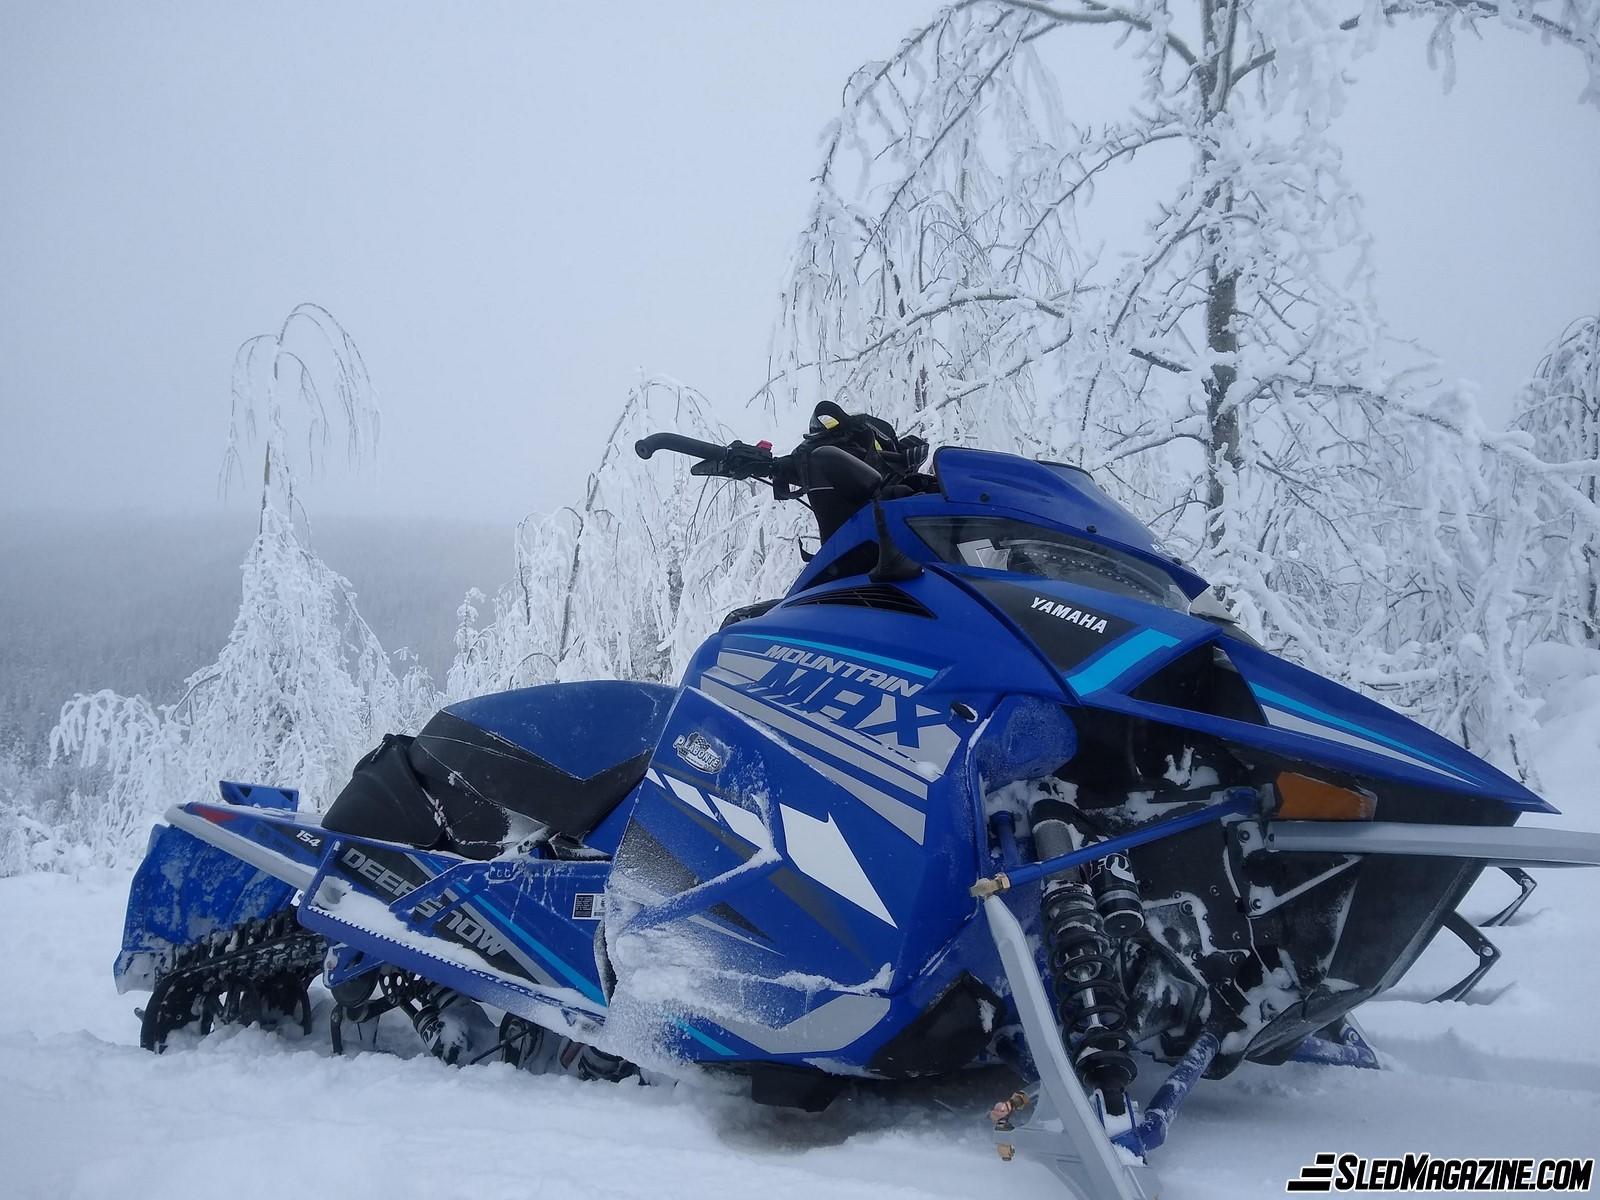 Announcing the Trial of the 2021 Yamaha Mountain Max - Snowmobile - Snowmobiler